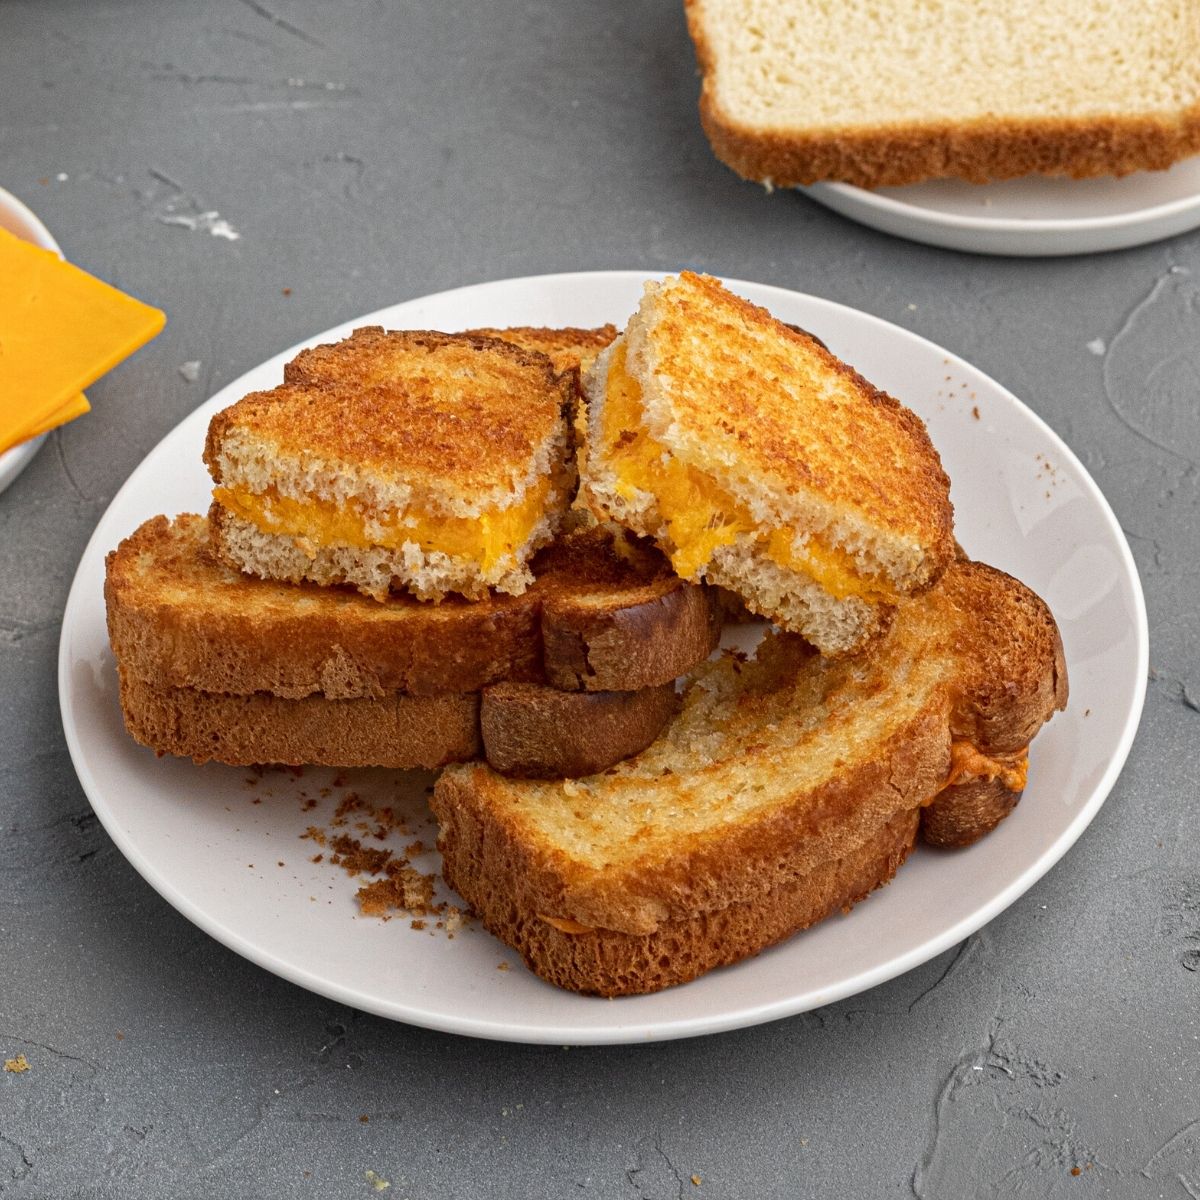 Golden toasted grilled cheese sandwich, cut into slices on a white plate.